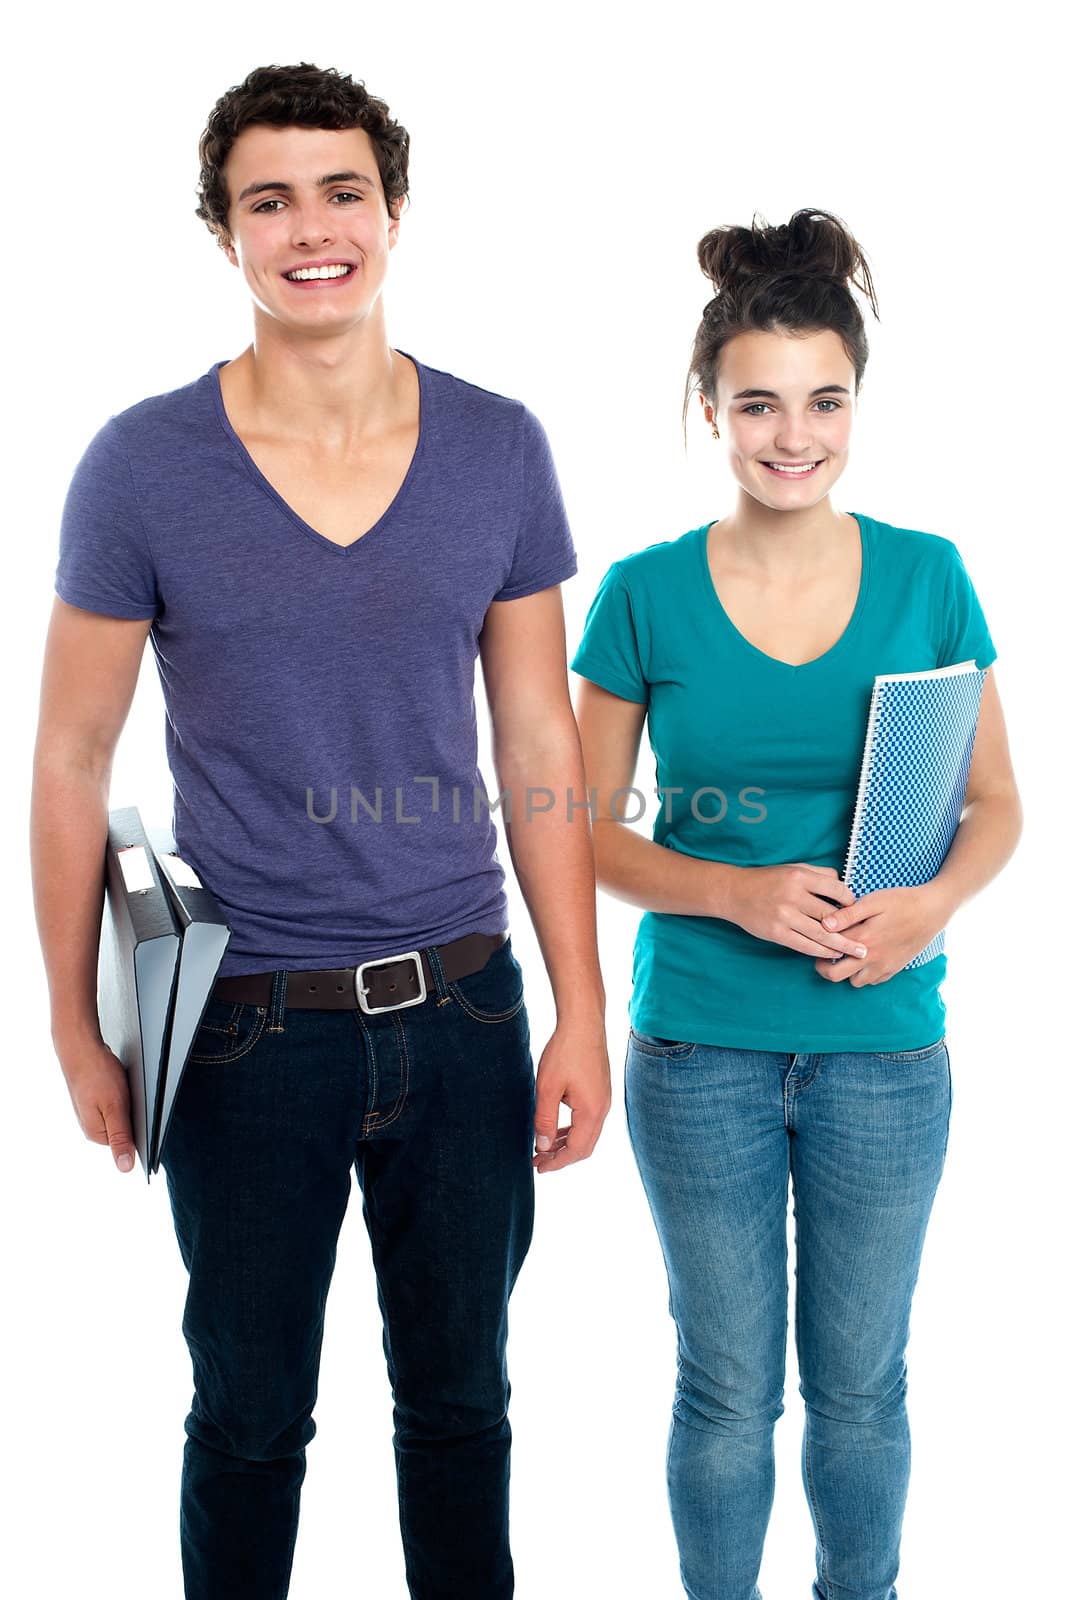 Fashionable college going students posing over white background